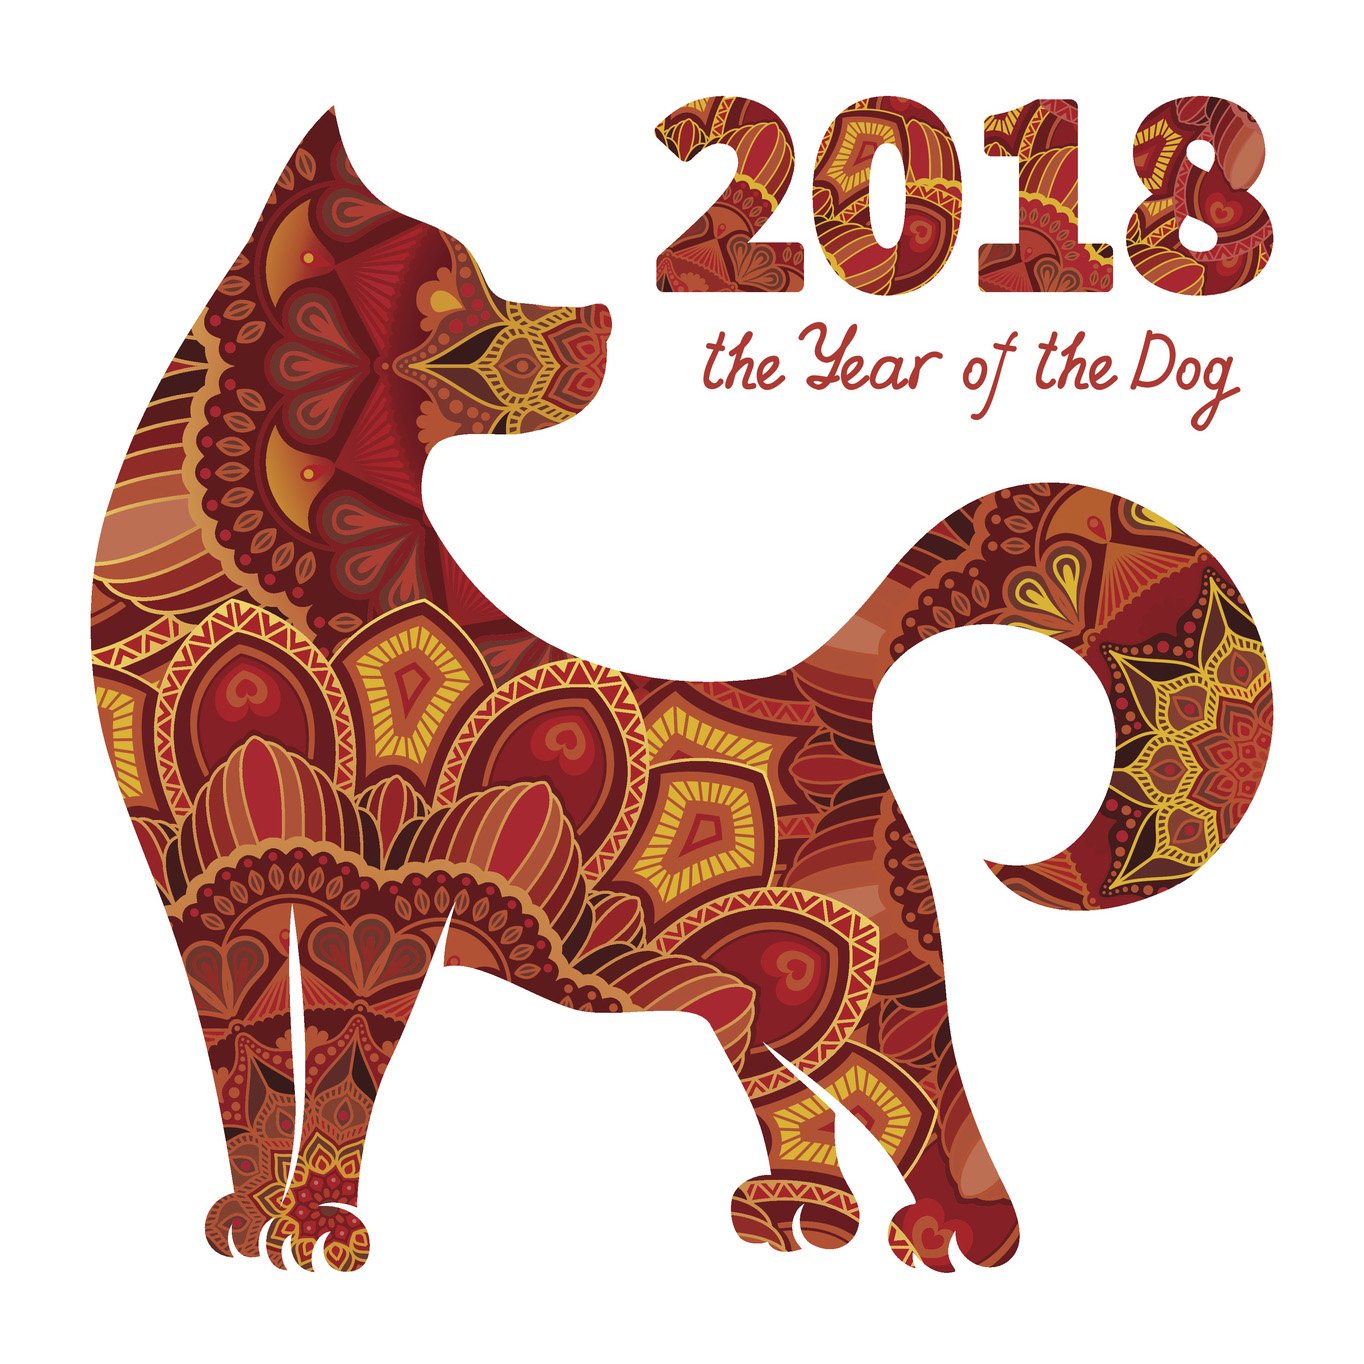 Lucky year for the year of the Dog,1934, 1946, 1958, 1970, 1982, 1994